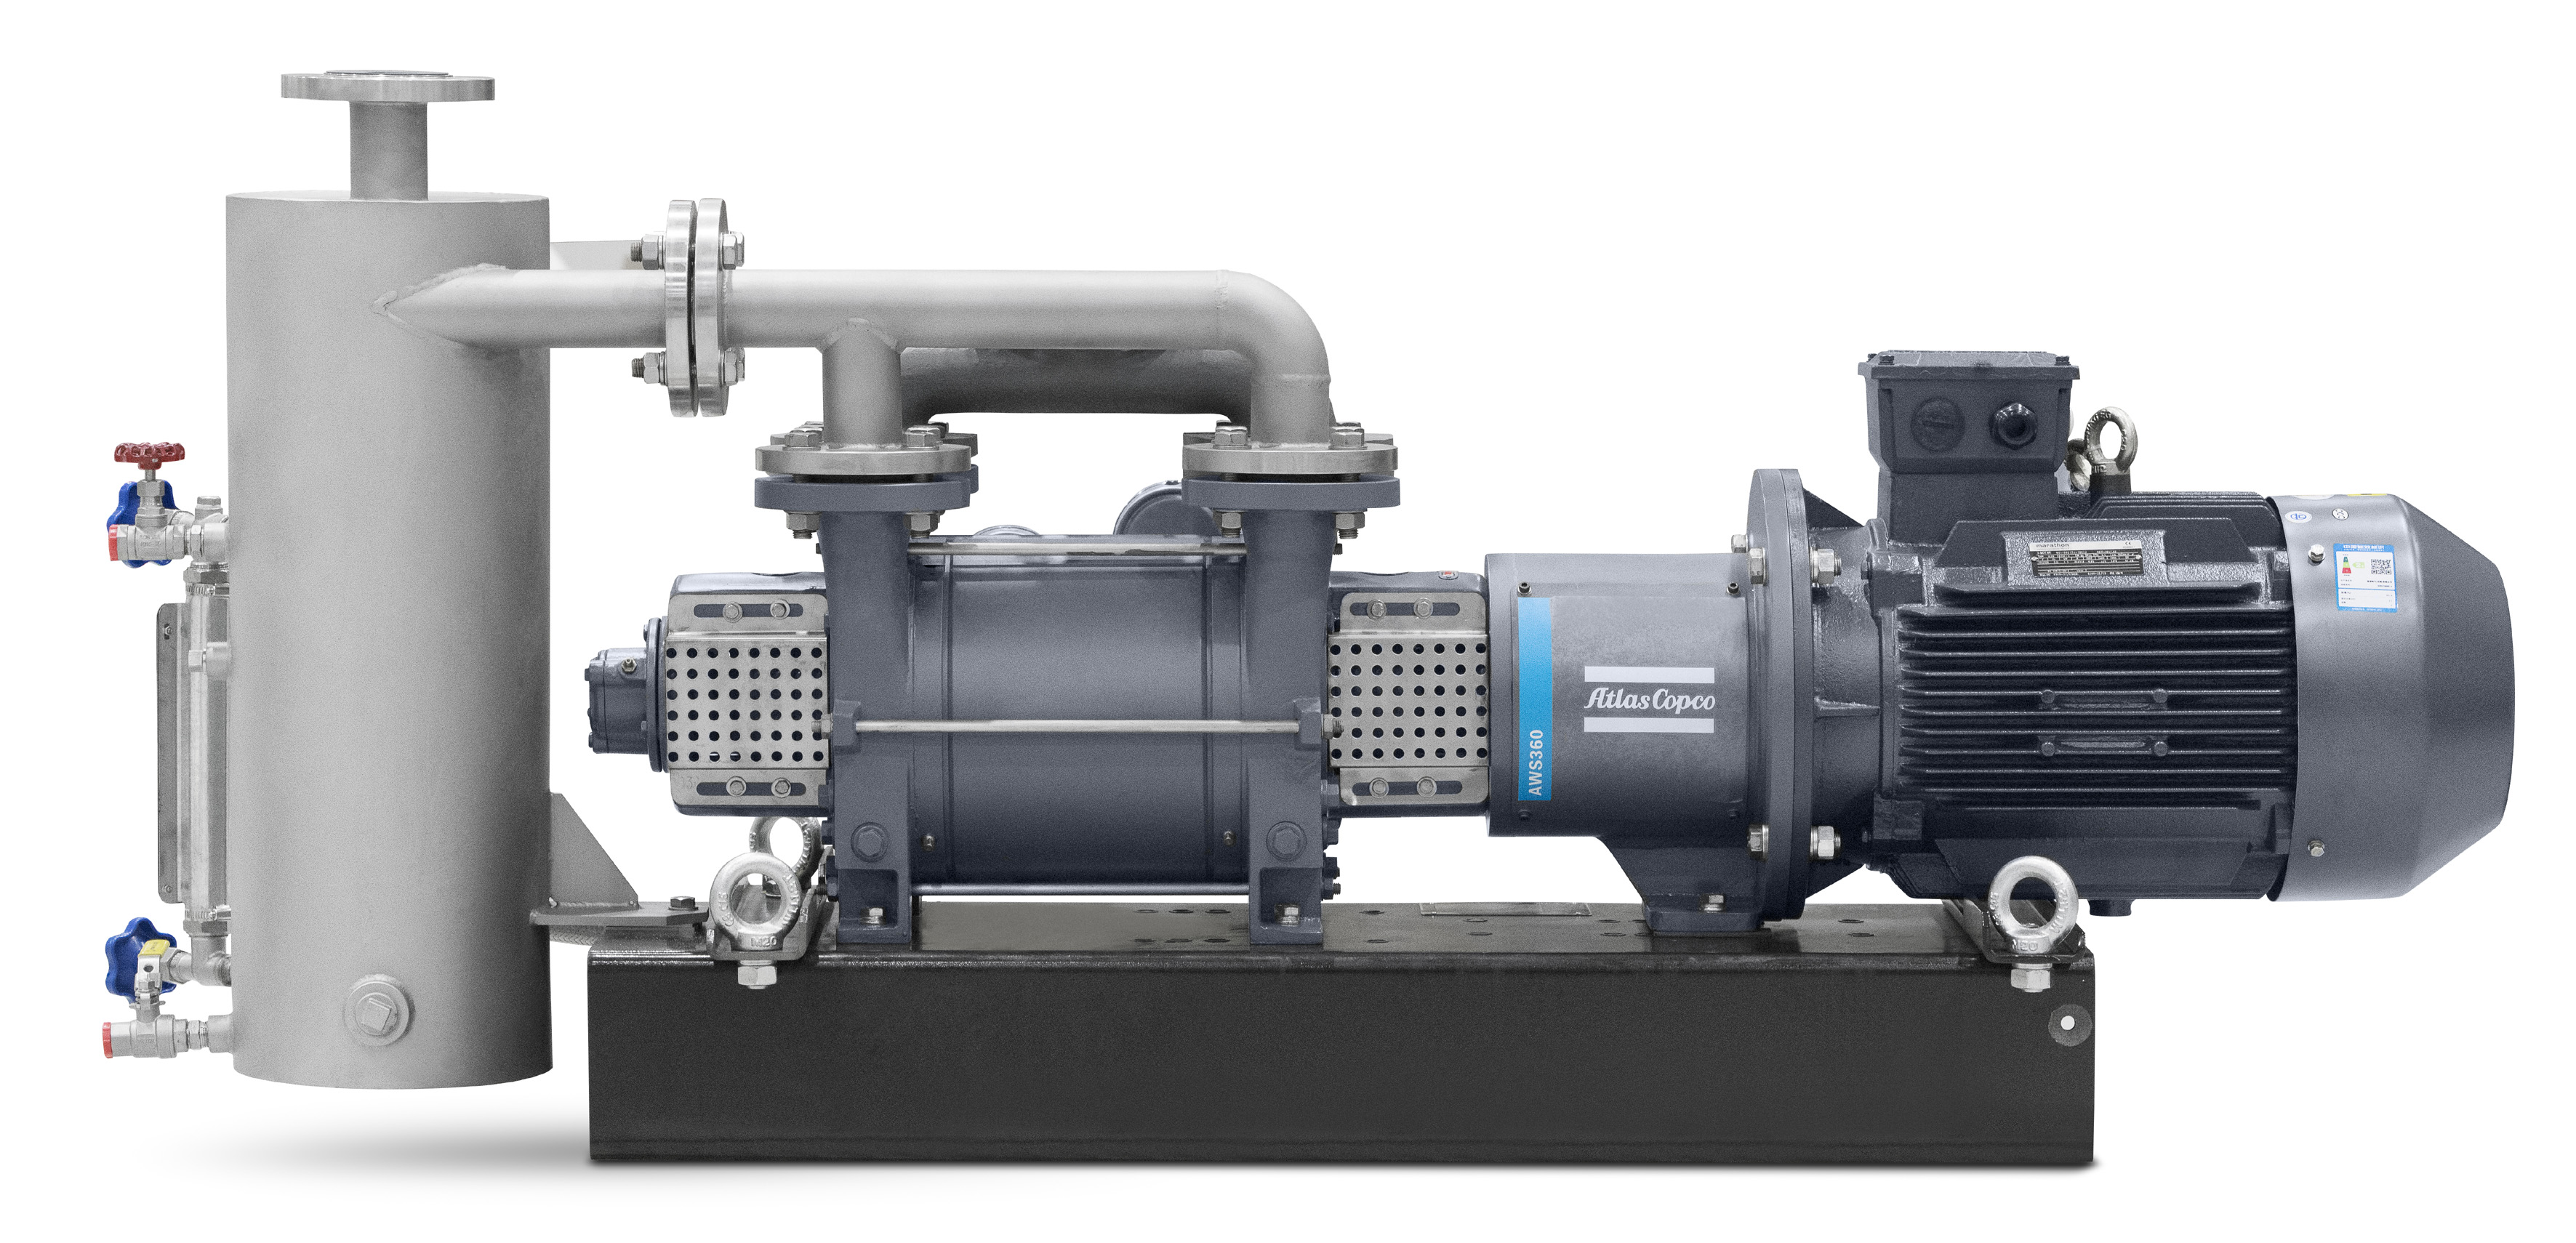 All AWS and AWD pumps can achieve ultimate pressure levels as low as 30 mbar (absolute).